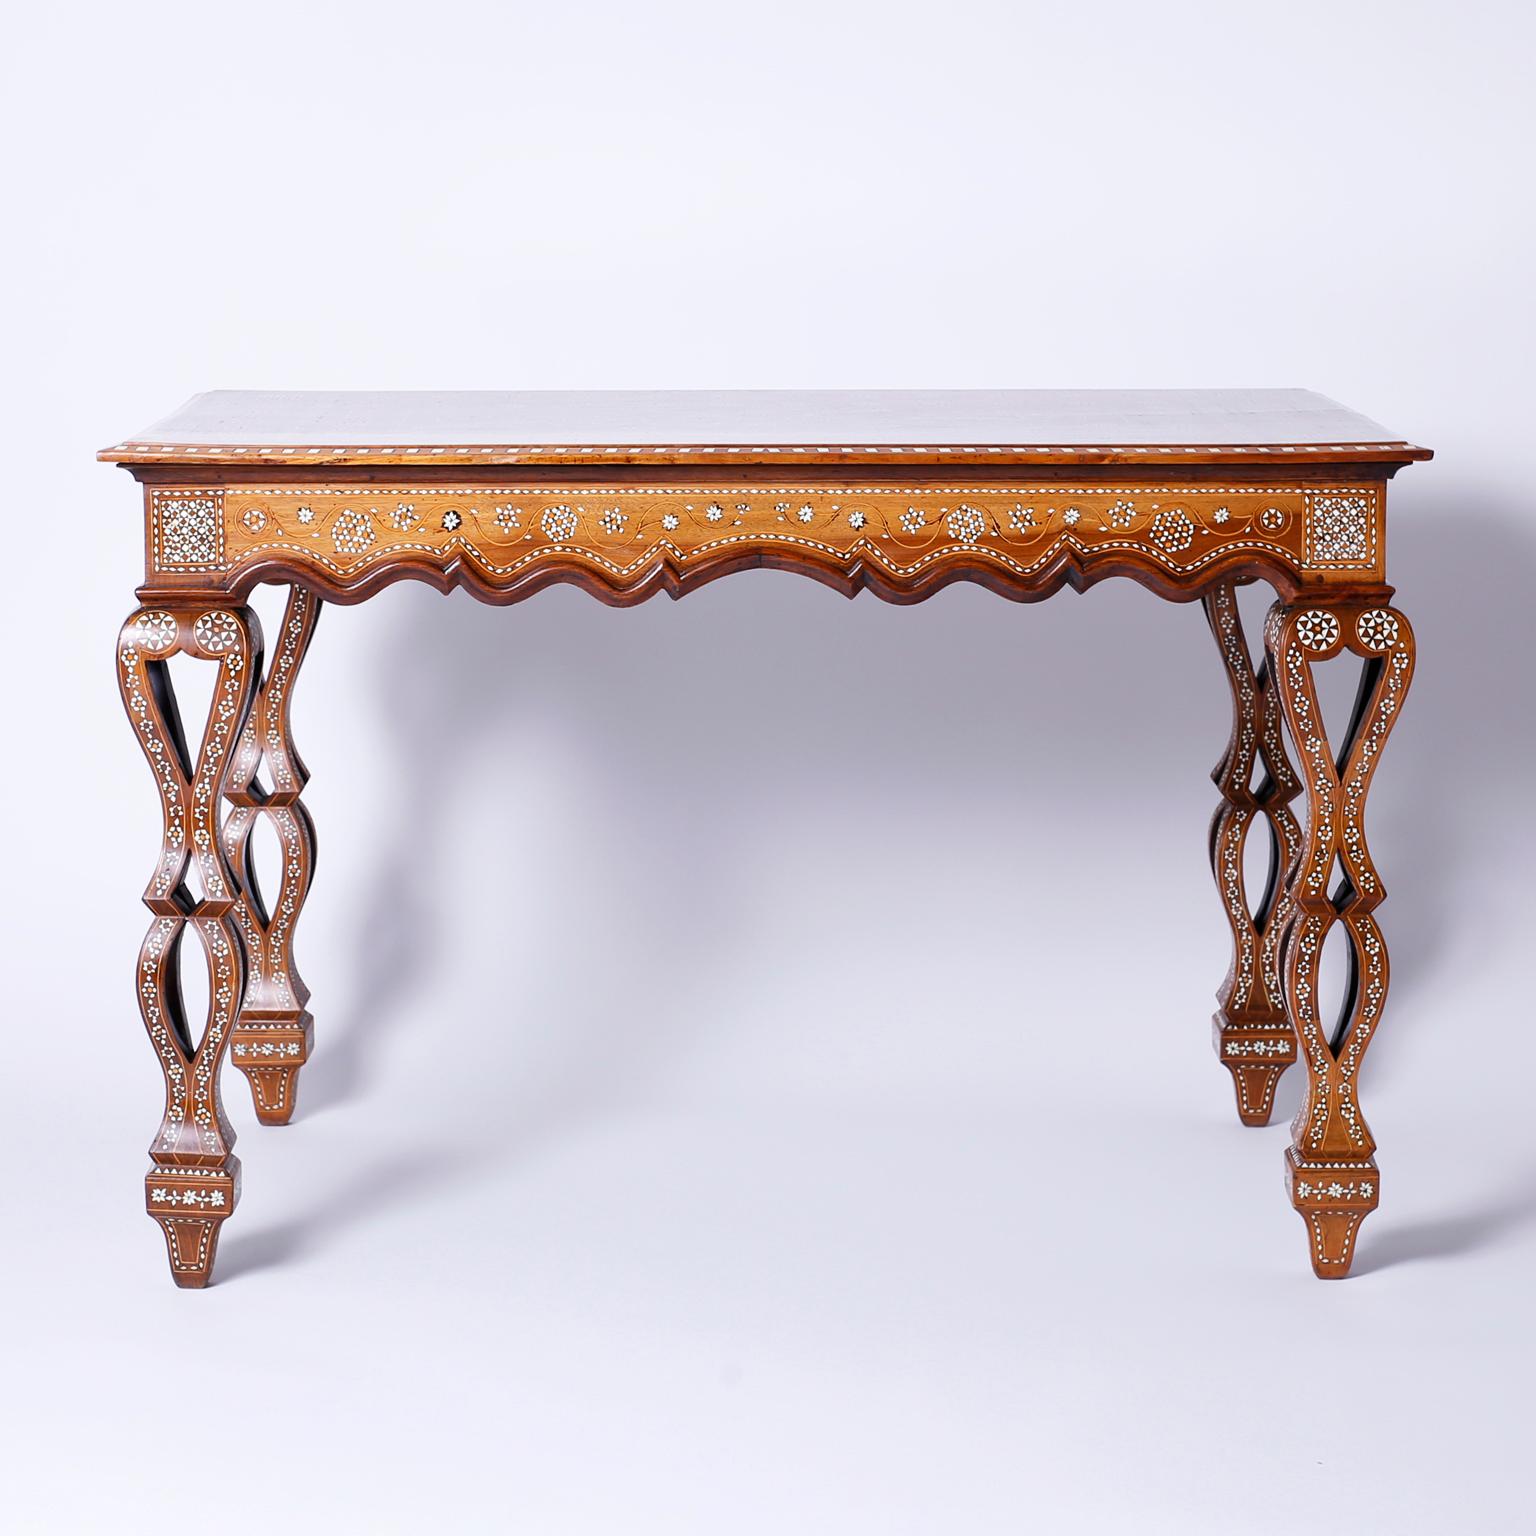 Captivating Syrian walnut center table, dining table, or writing table with a rectangular top inlaid with bone, mother or pearl, and king wood in an enchanting combination of floral and geometric designs. The skirt is scalloped and inlaid.
The